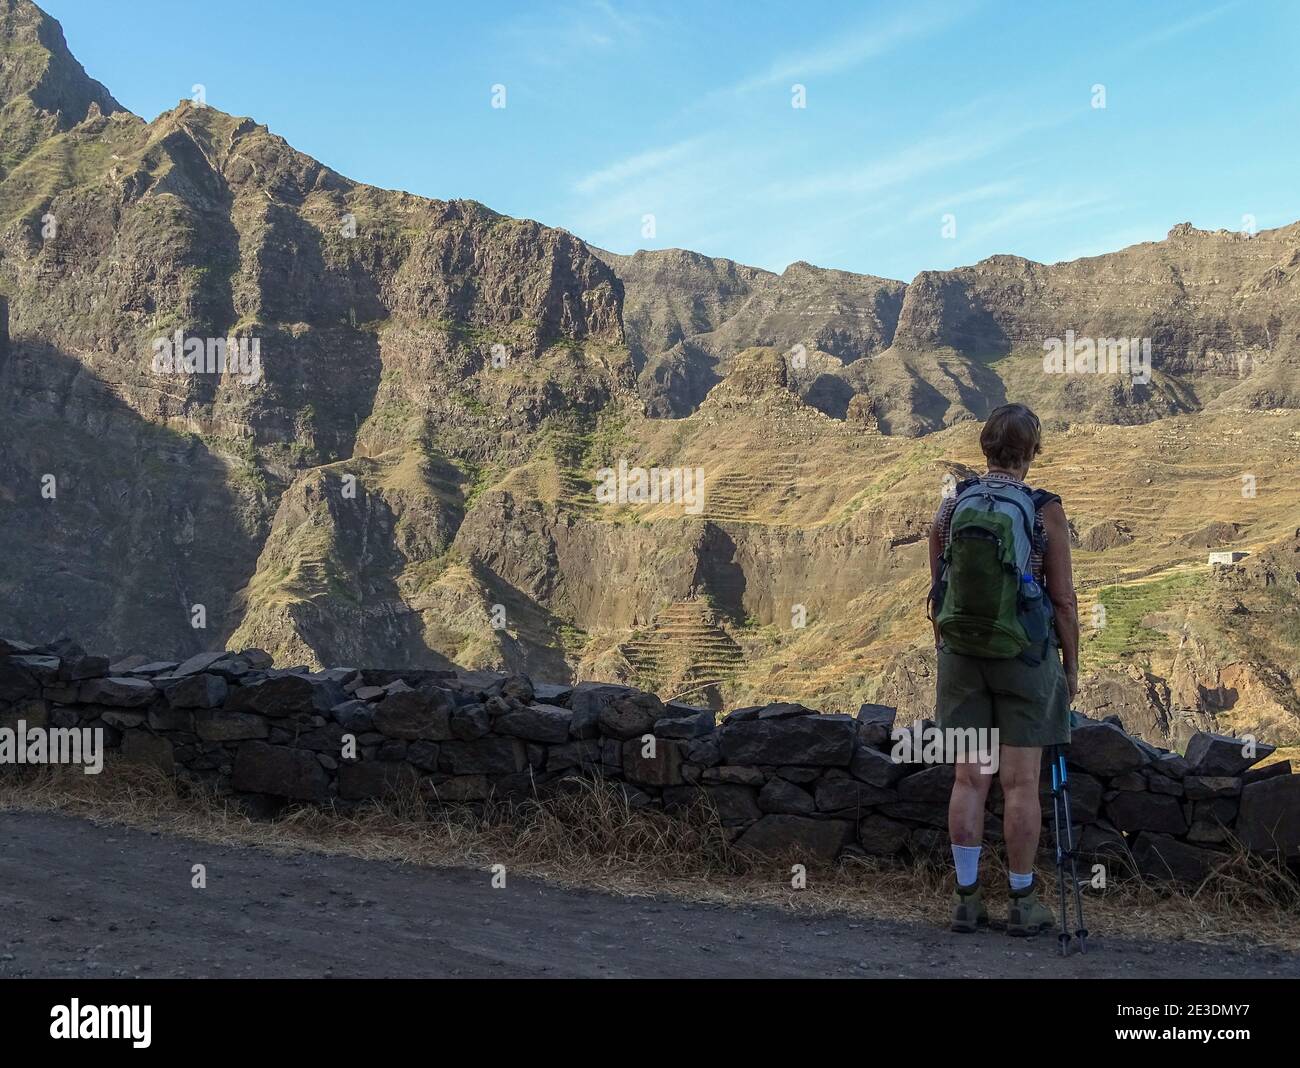 Cape Verde, Santo Antao island, Africa, walking tours, solo, one person. Stock Photo